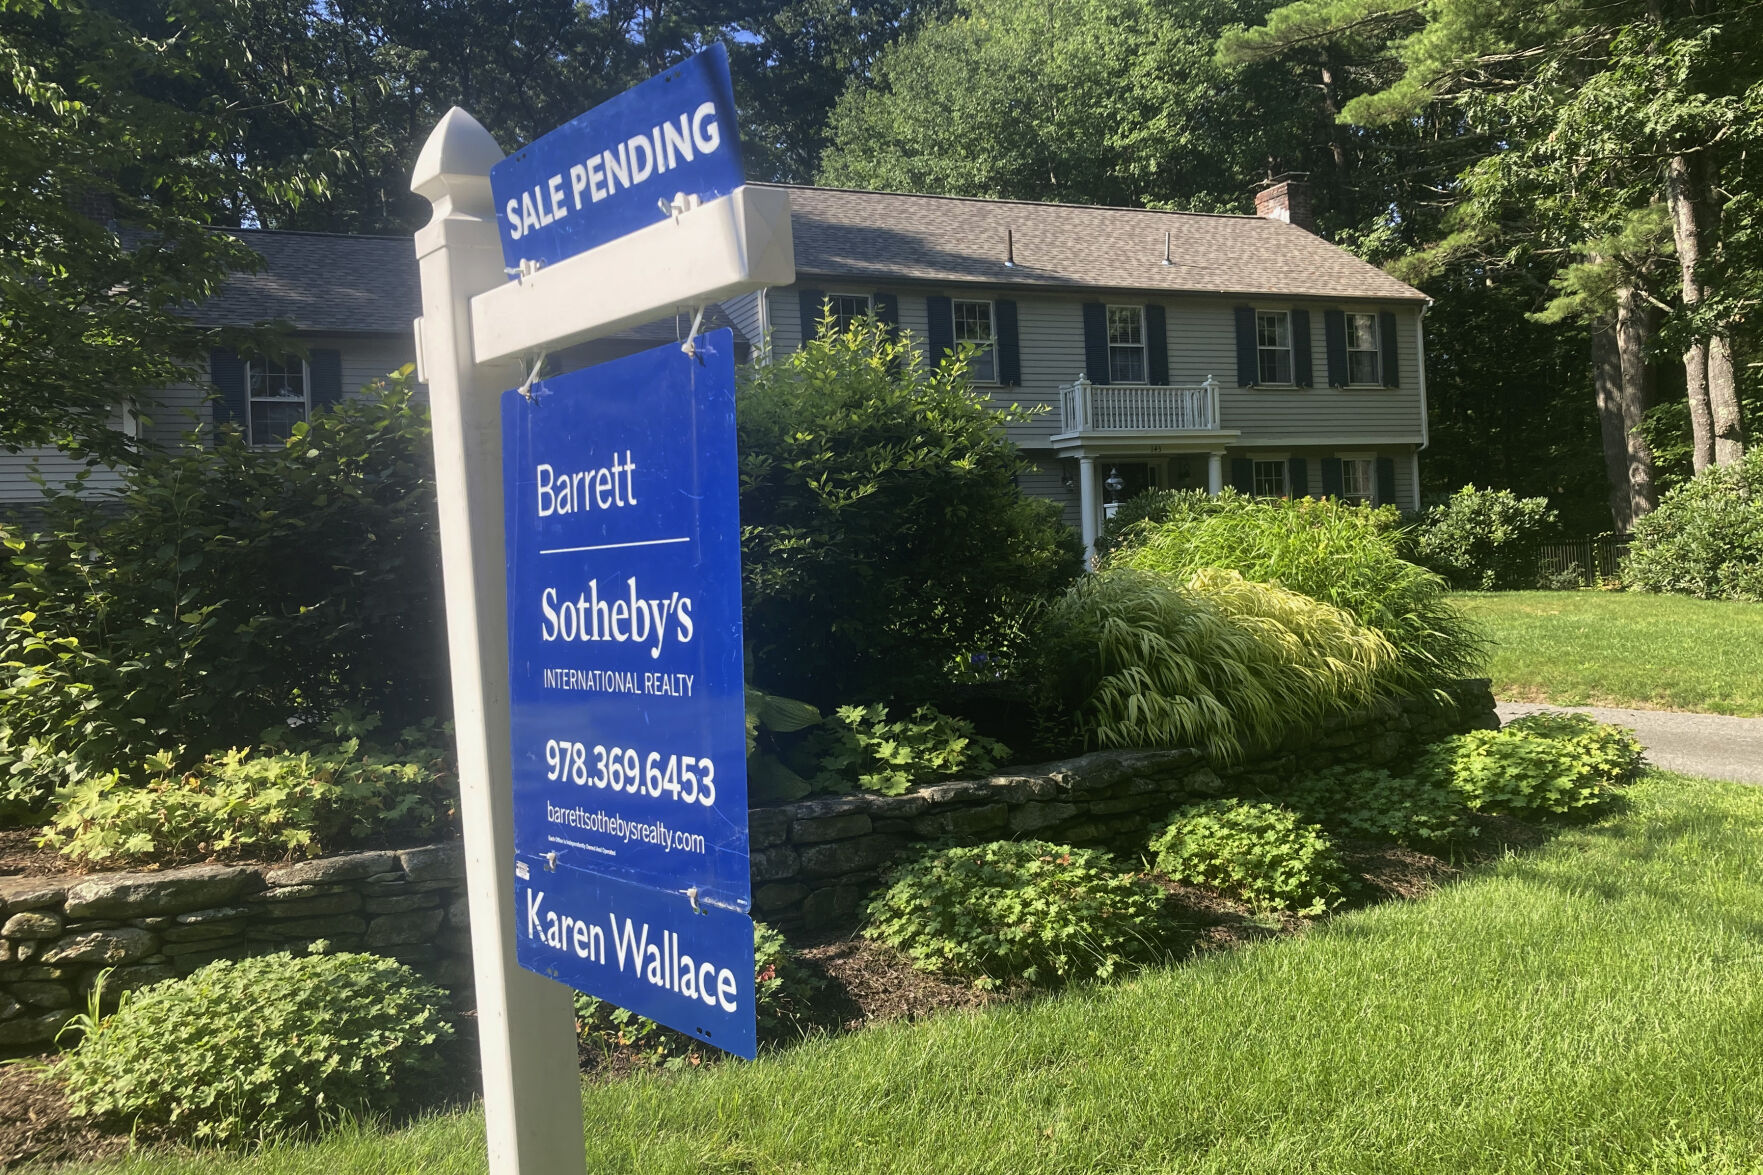 <p>A sign noting a pending sale is shown in front of a home on Sunday, Aug. 20, 2023, in Concord, Mass. On Tuesday, Aug. 22, 2023, the National Association of Realtors reports on sales of existing homes in July. (AP Photo/Peter Morgan)</p>   PHOTO CREDIT: Peter Morgan